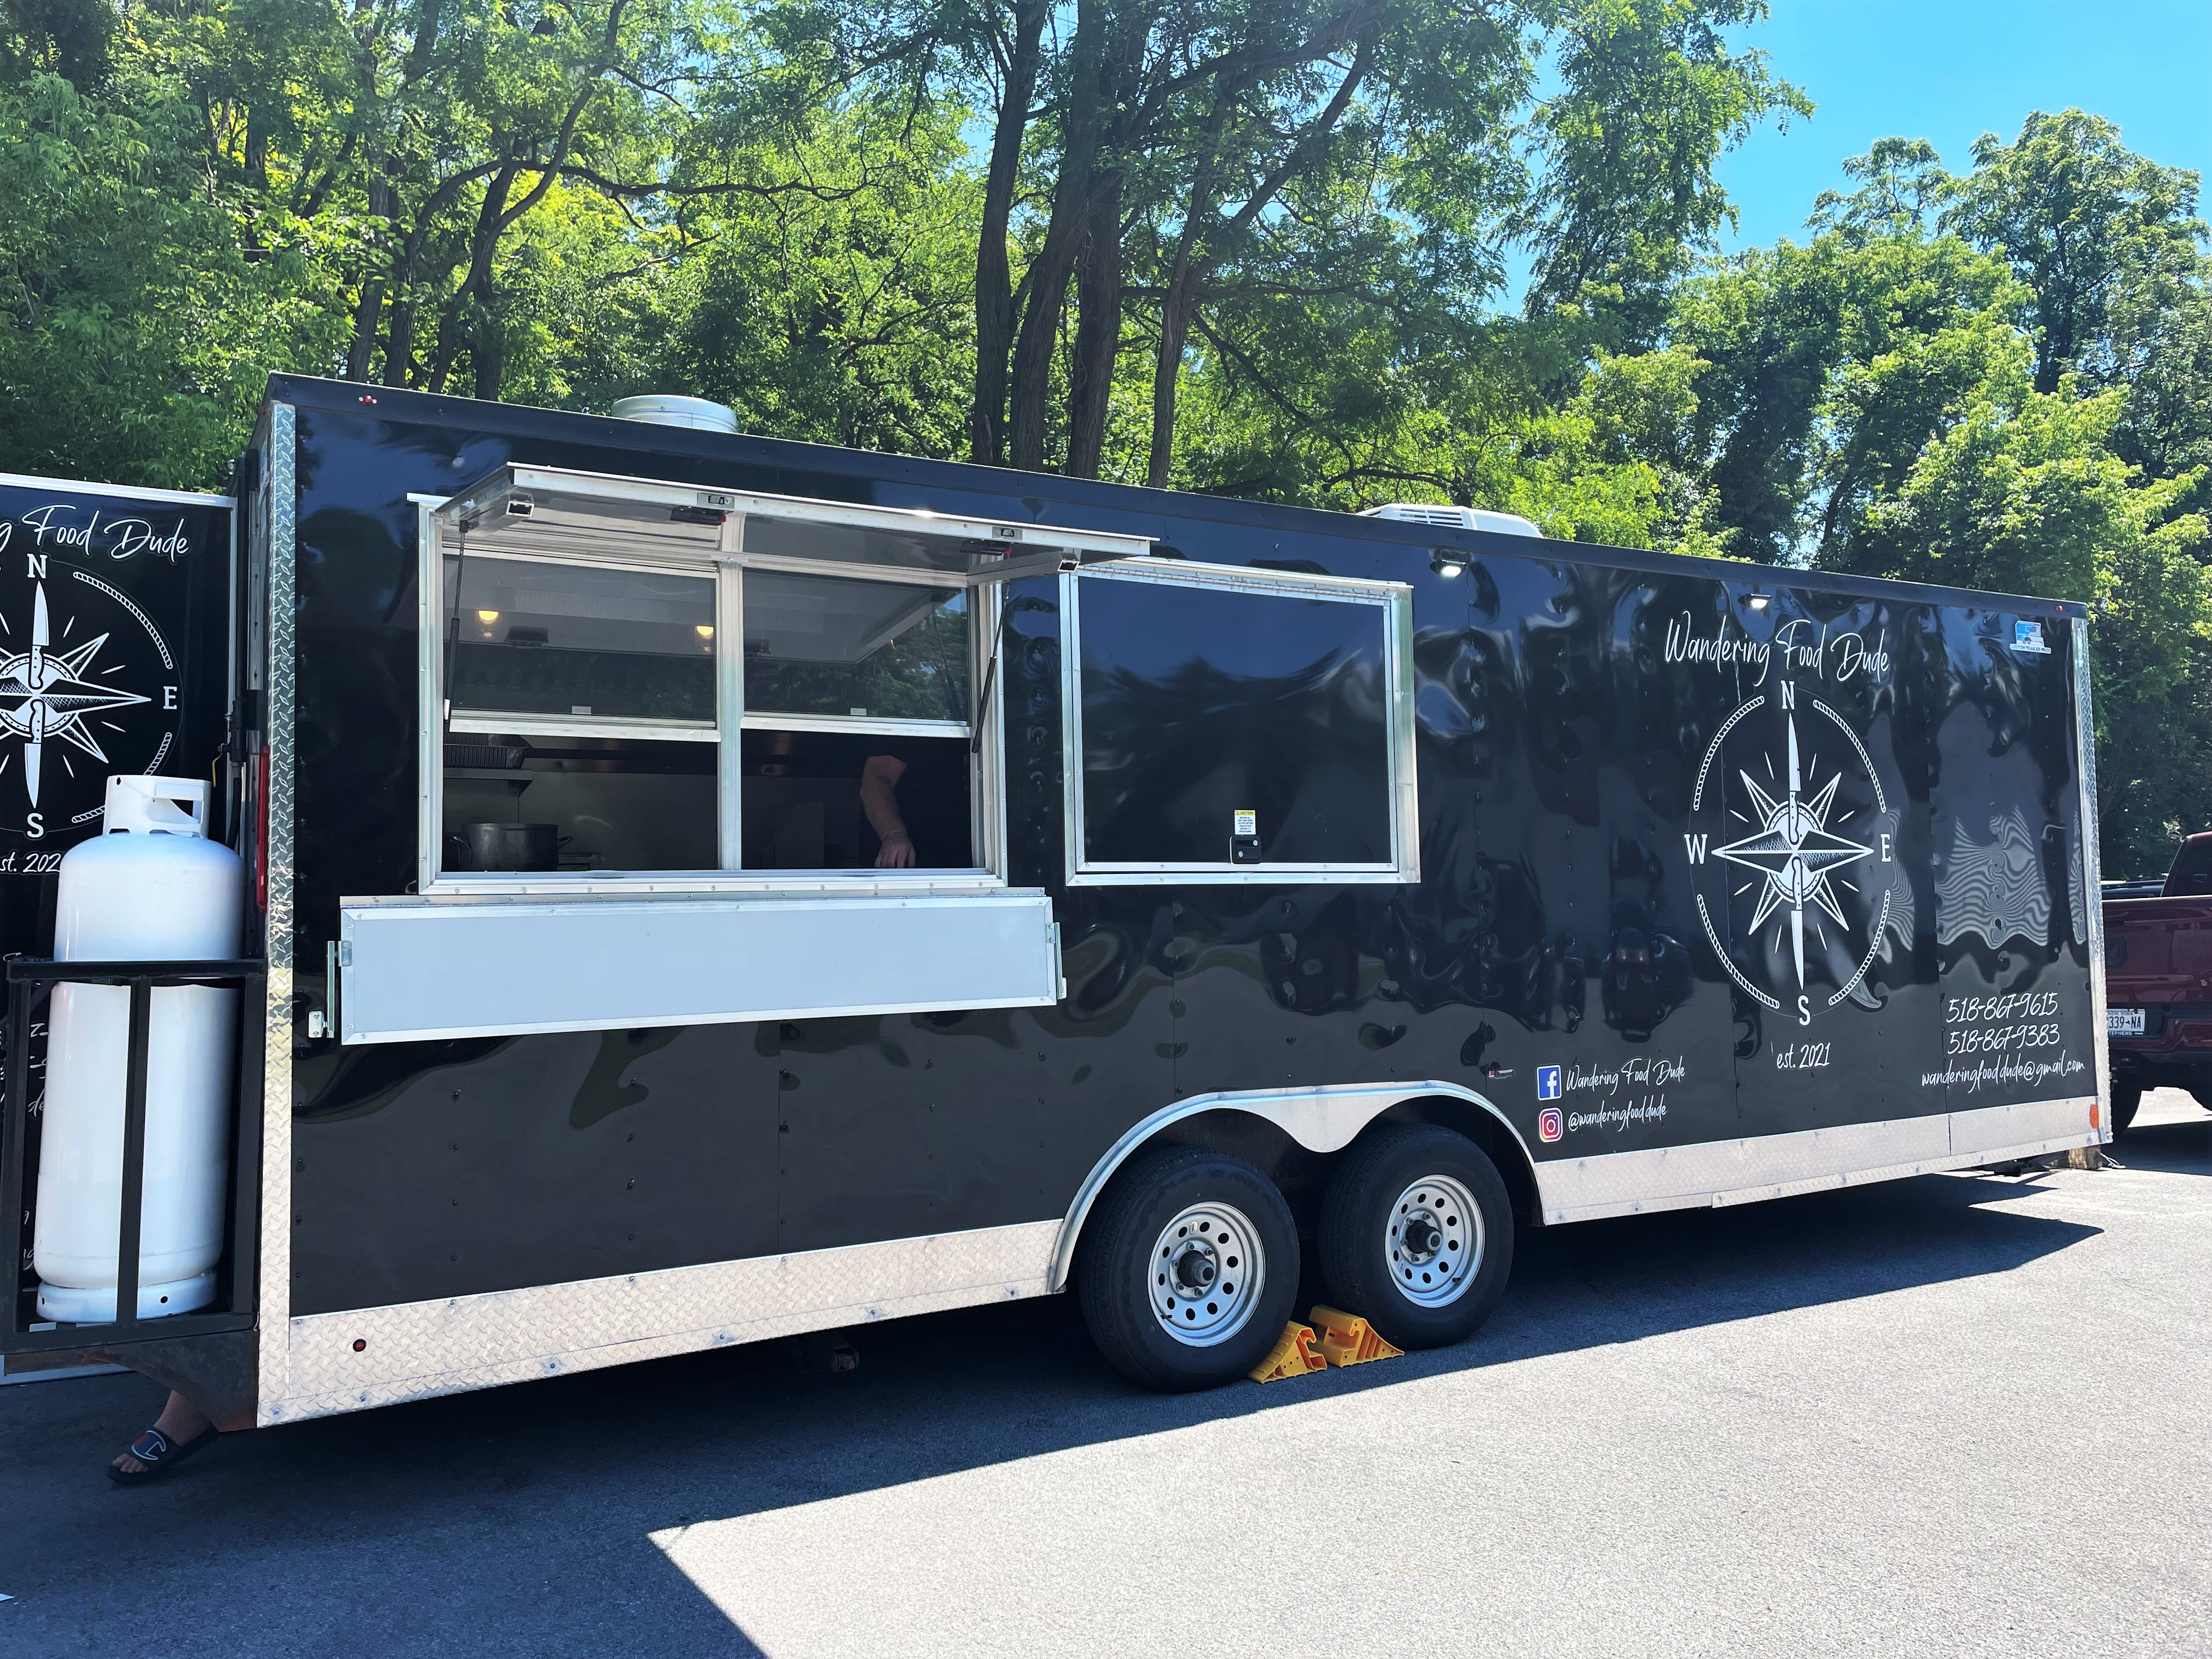 Wandering Dago food truck booted from Saratoga track for name - Table  Hopping